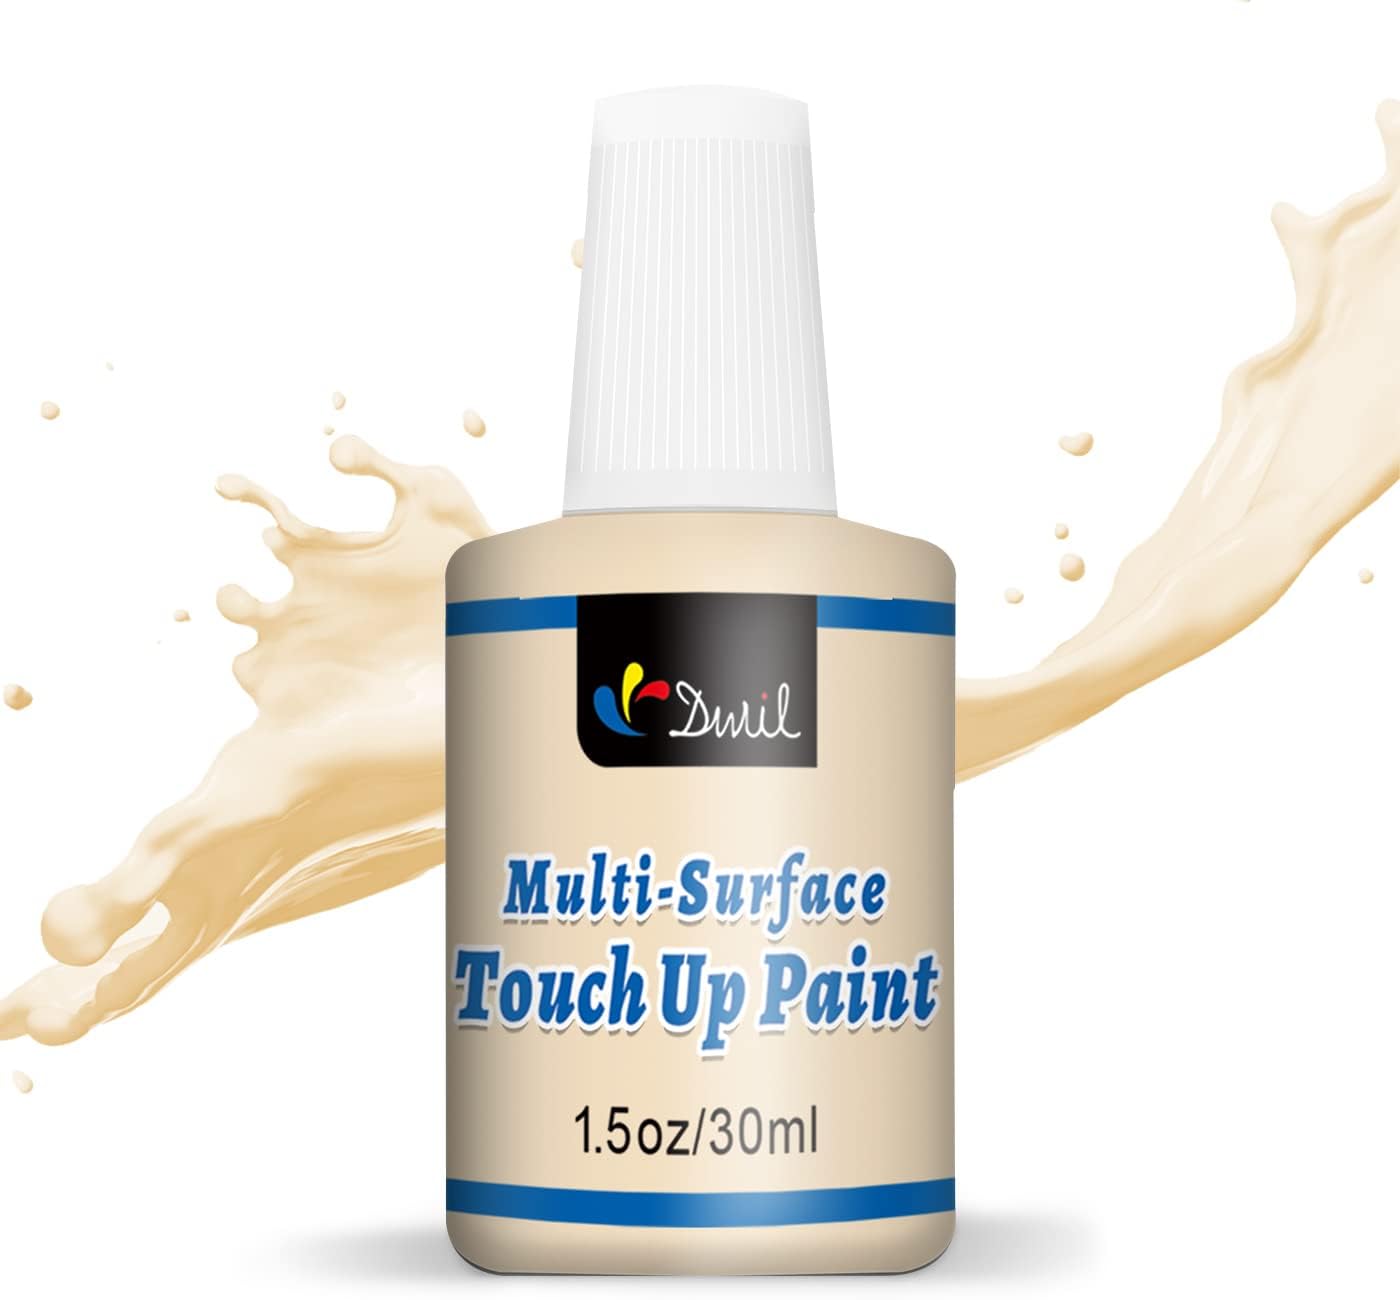 DWIL Multi Surface Touch Up Paint - White Touch Up [...]